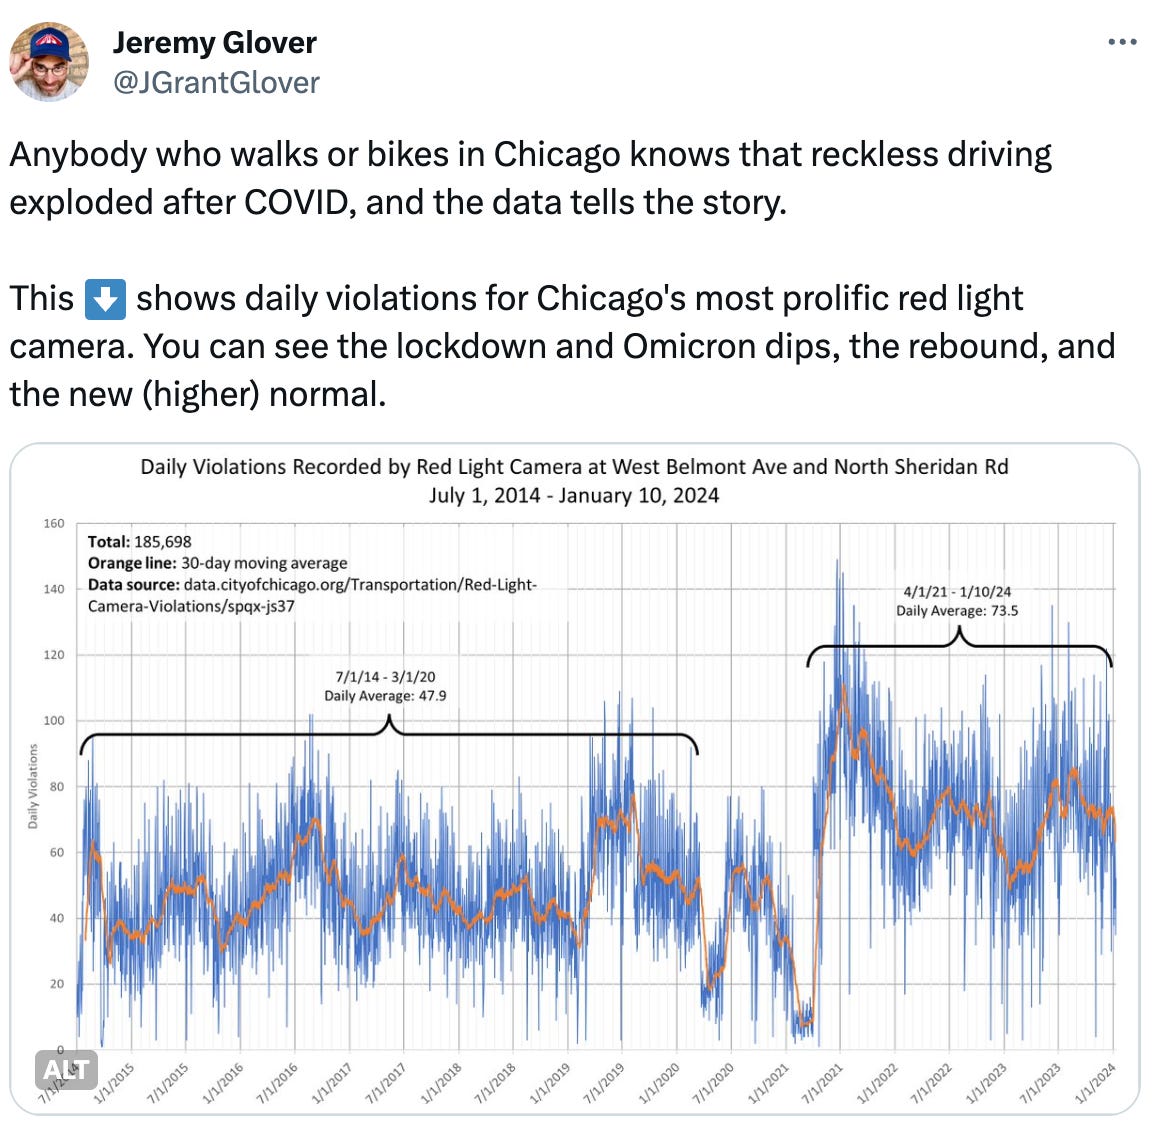  Jeremy Glover @JGrantGlover Anybody who walks or bikes in Chicago knows that reckless driving exploded after COVID, and the data tells the story.  This ⬇️ shows daily violations for Chicago's most prolific red light camera. You can see the lockdown and Omicron dips, the rebound, and the new (higher) normal.